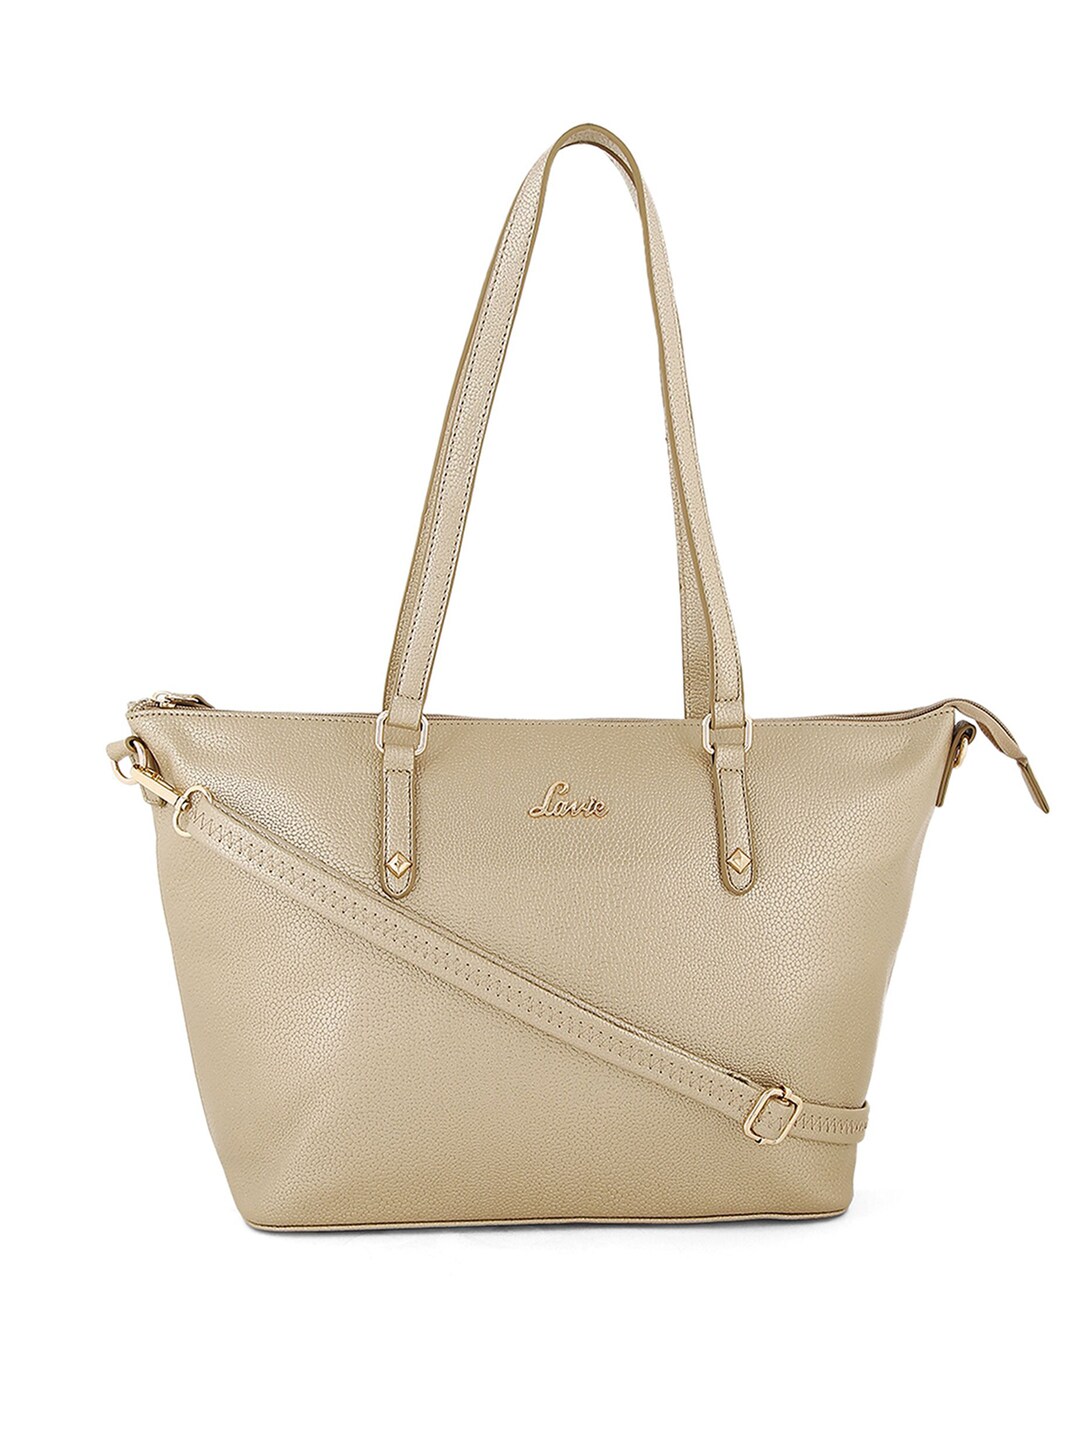 Lavie Gold-Toned Solid Tote Bag Price in India